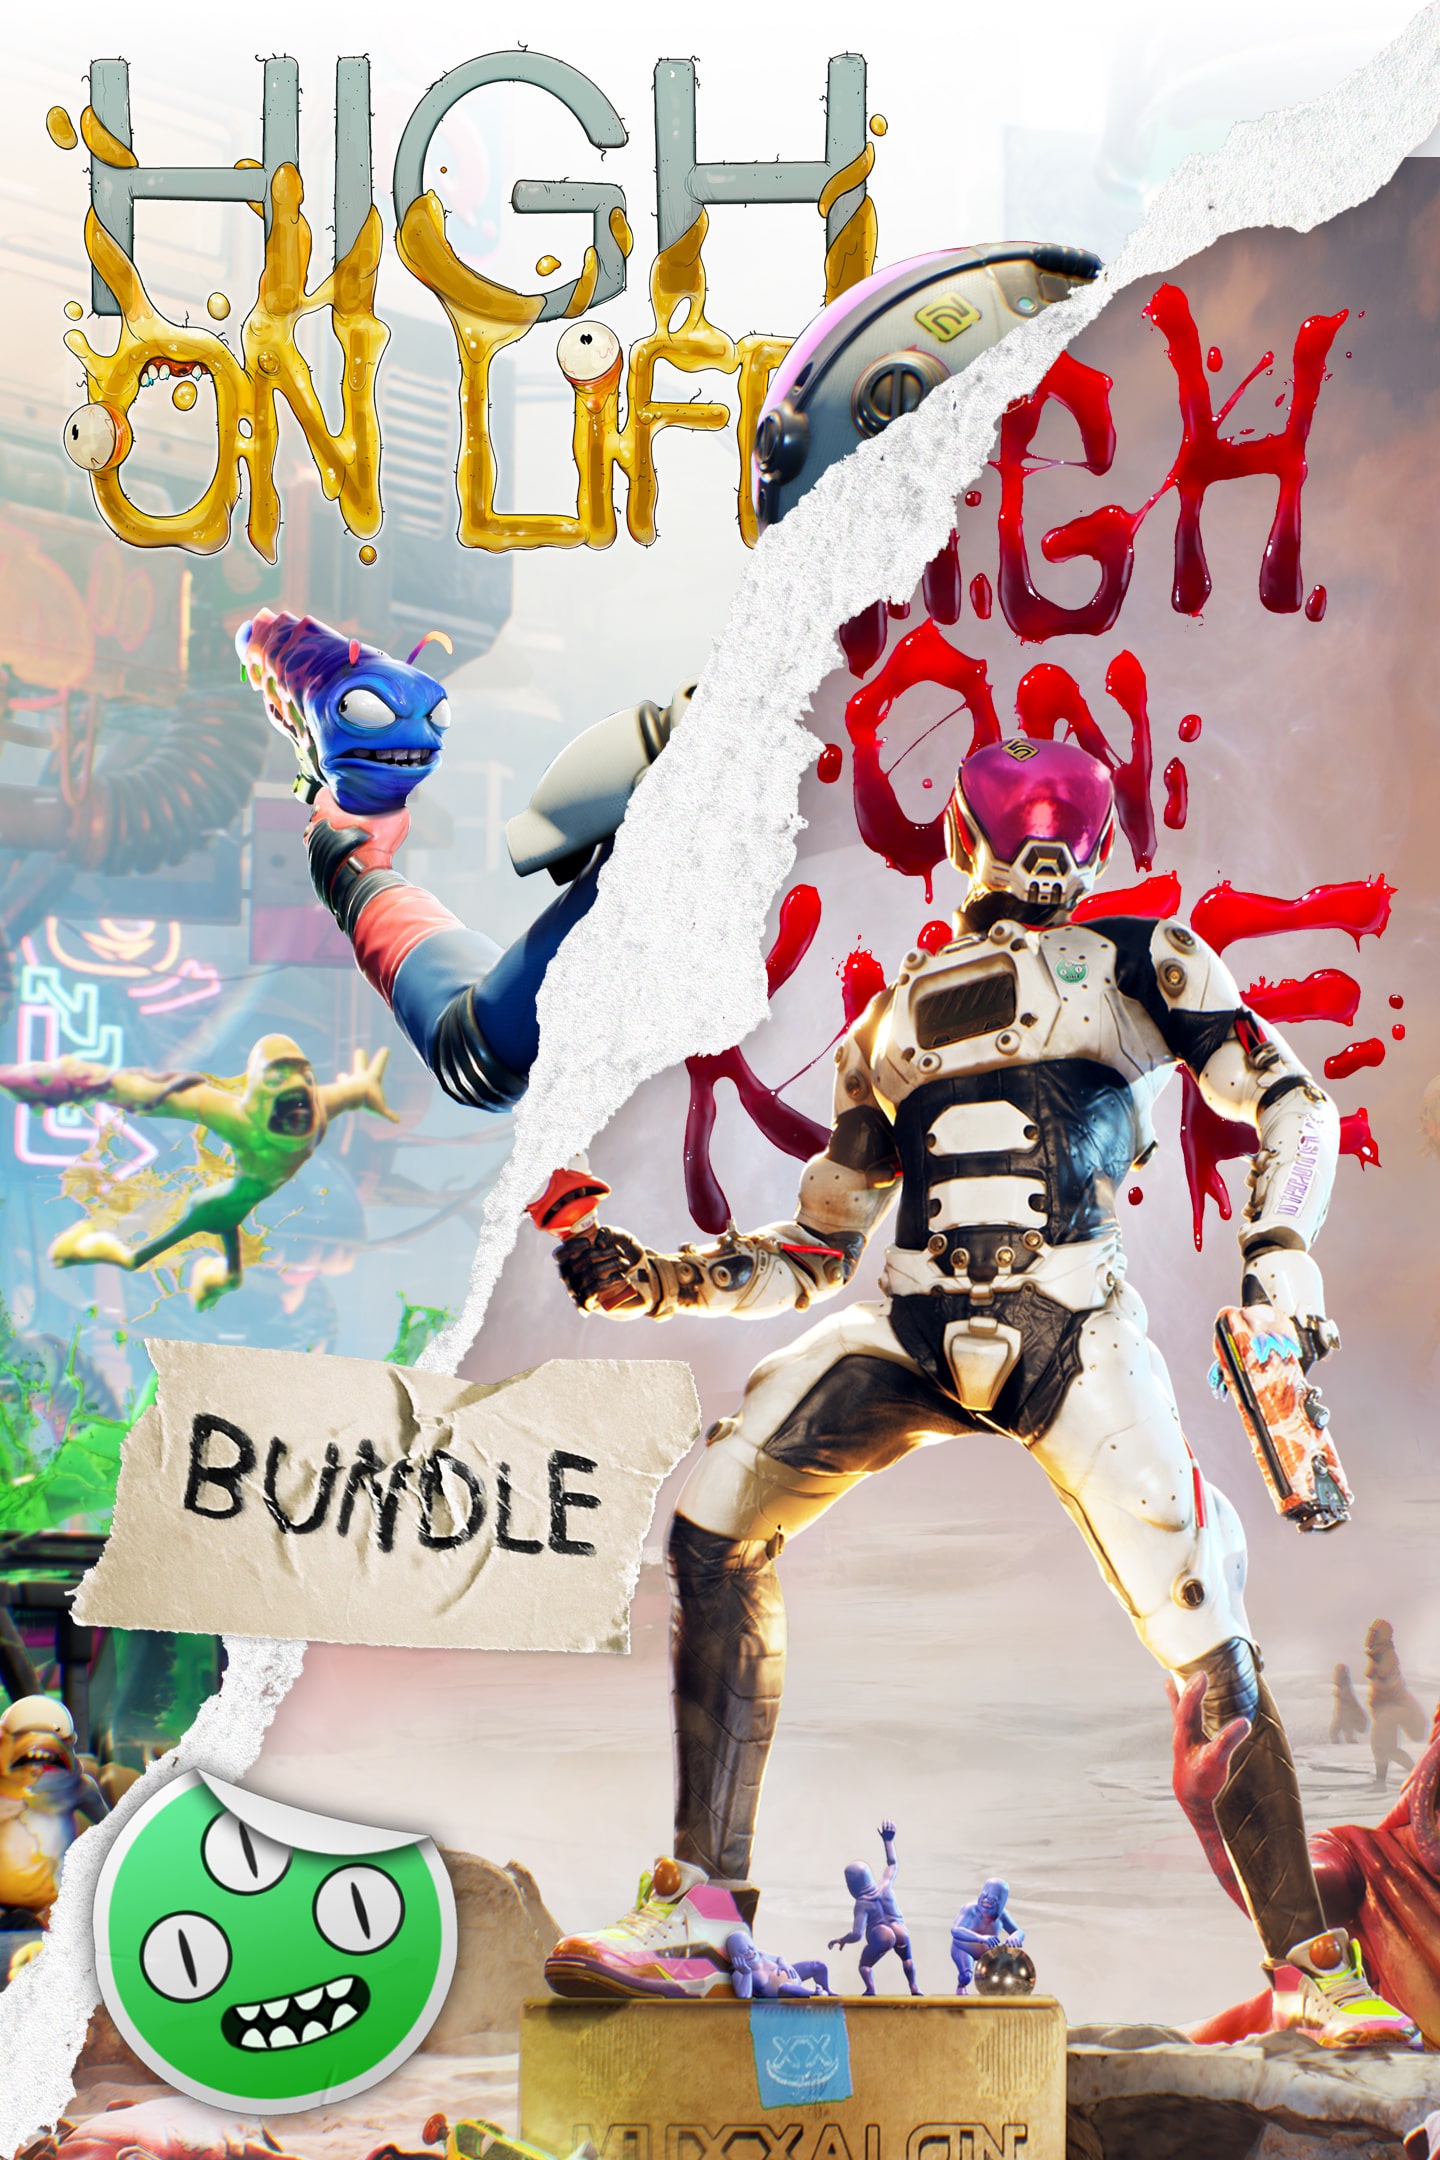 High on Life's first paid DLC will be released next week